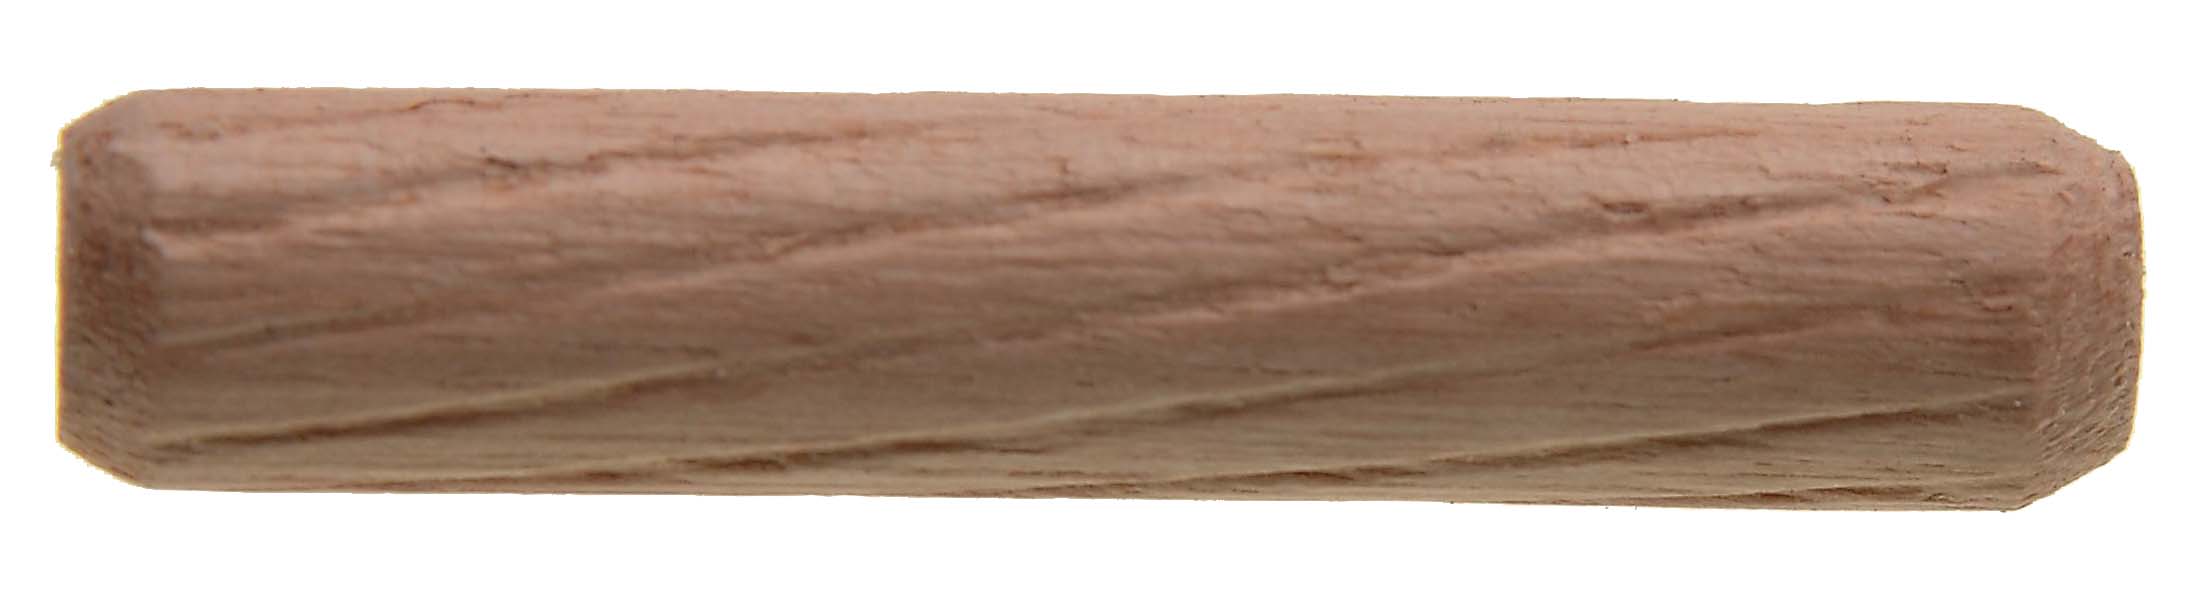 Image of Wickes 6mm Wooden Dowel for Reinforcing Timber Joints - Pack of 25